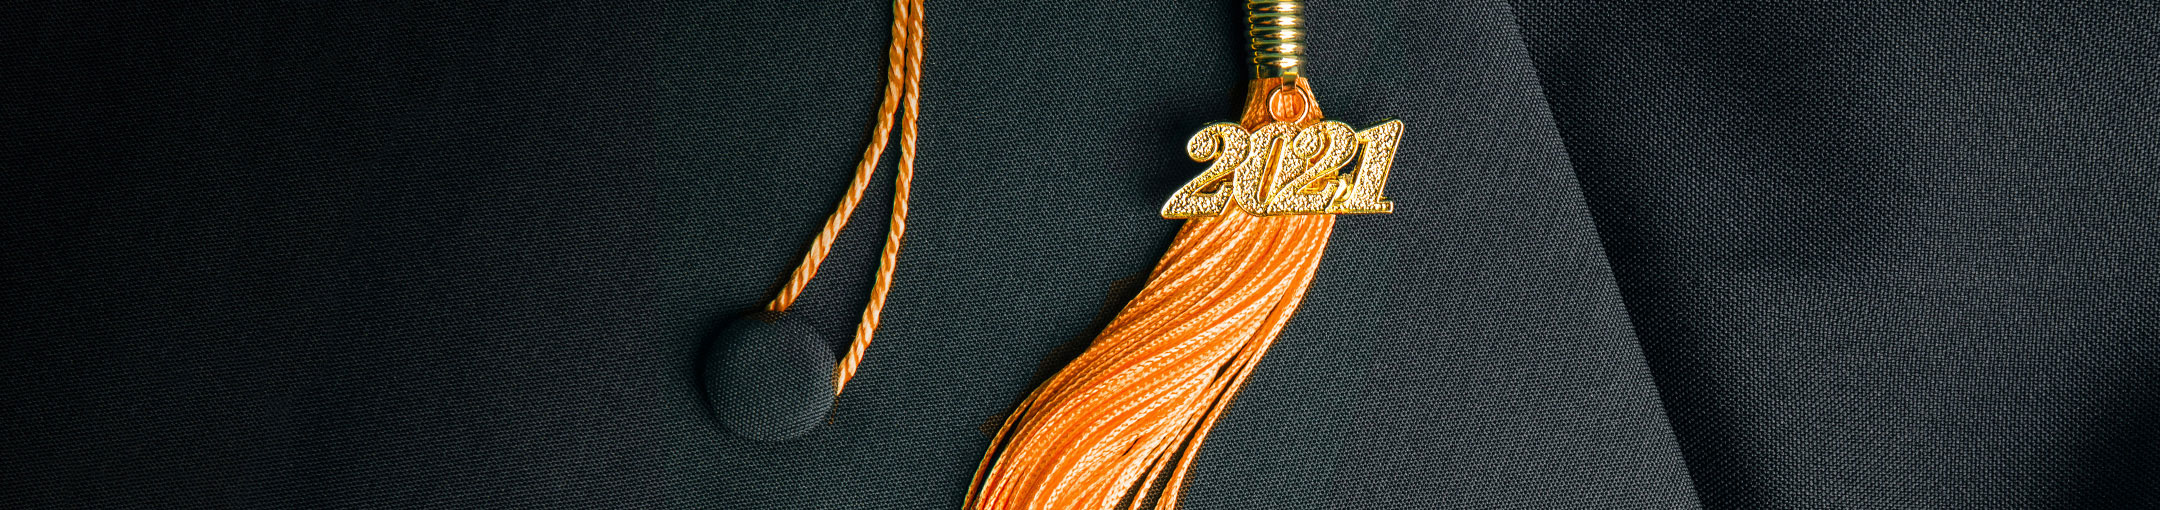 Graduation cap with orange tassel and the year 2021